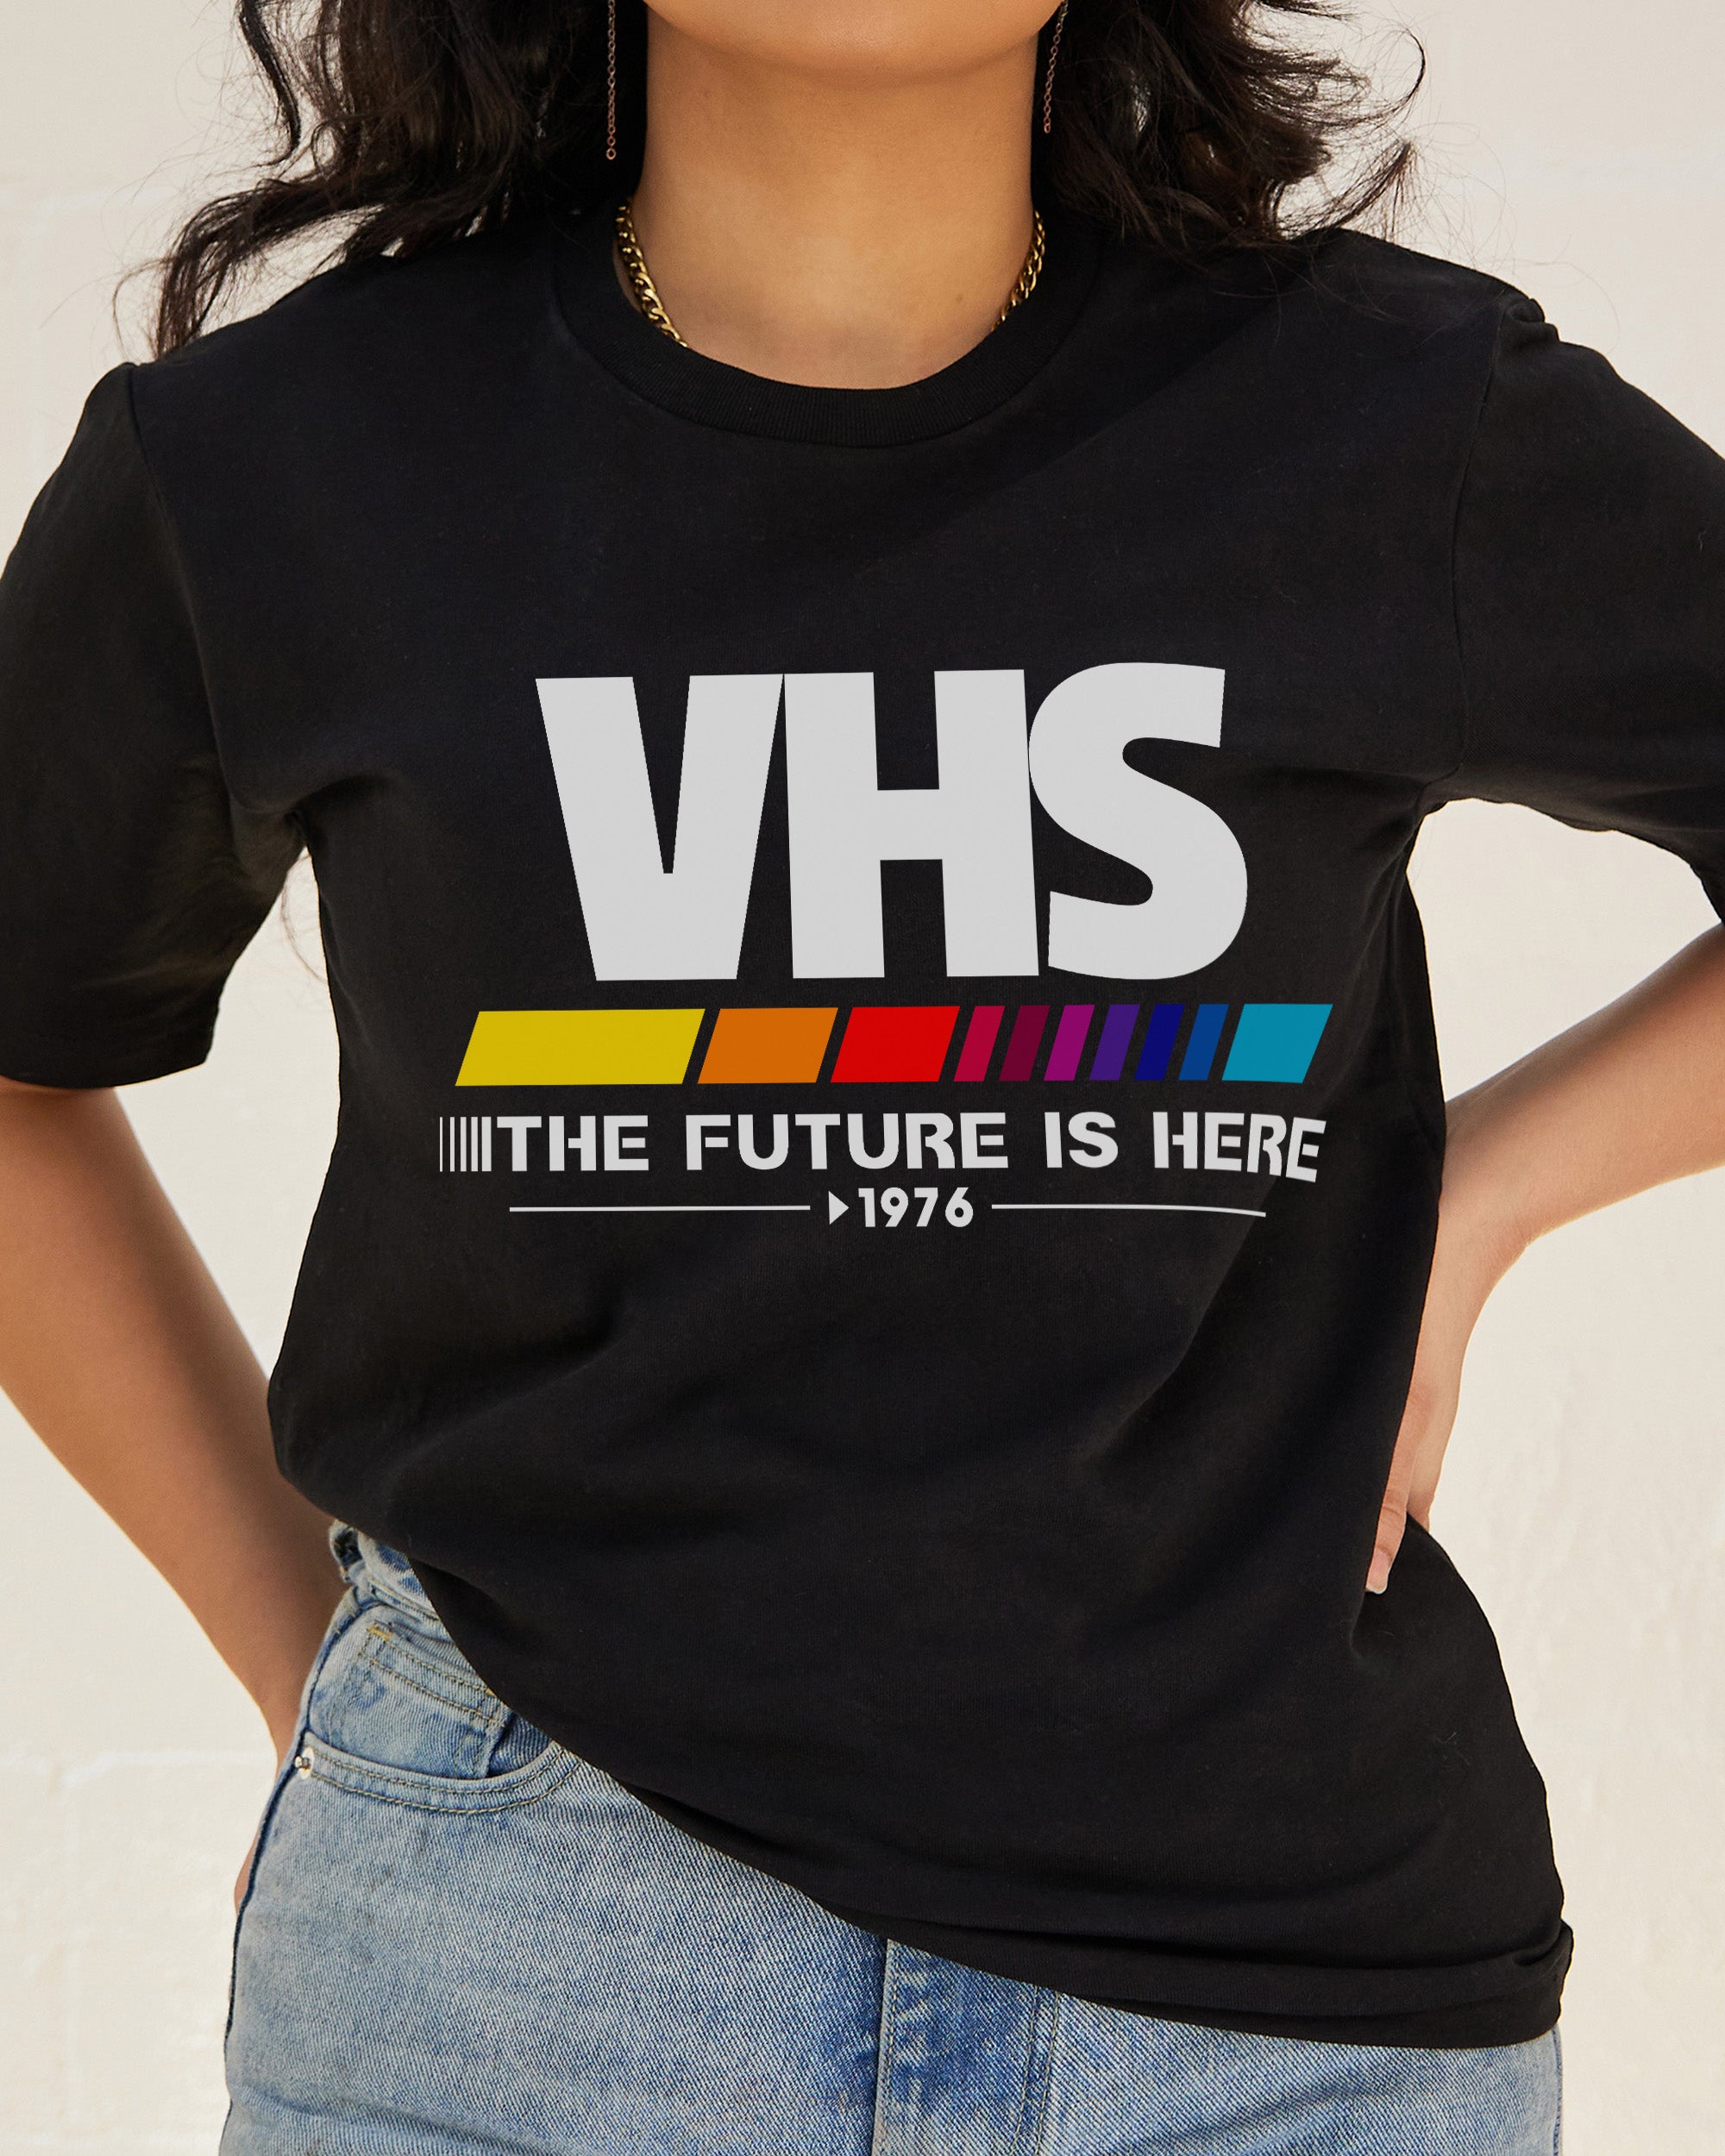 VHS - The Future is Now T-Shirt Australia Online 